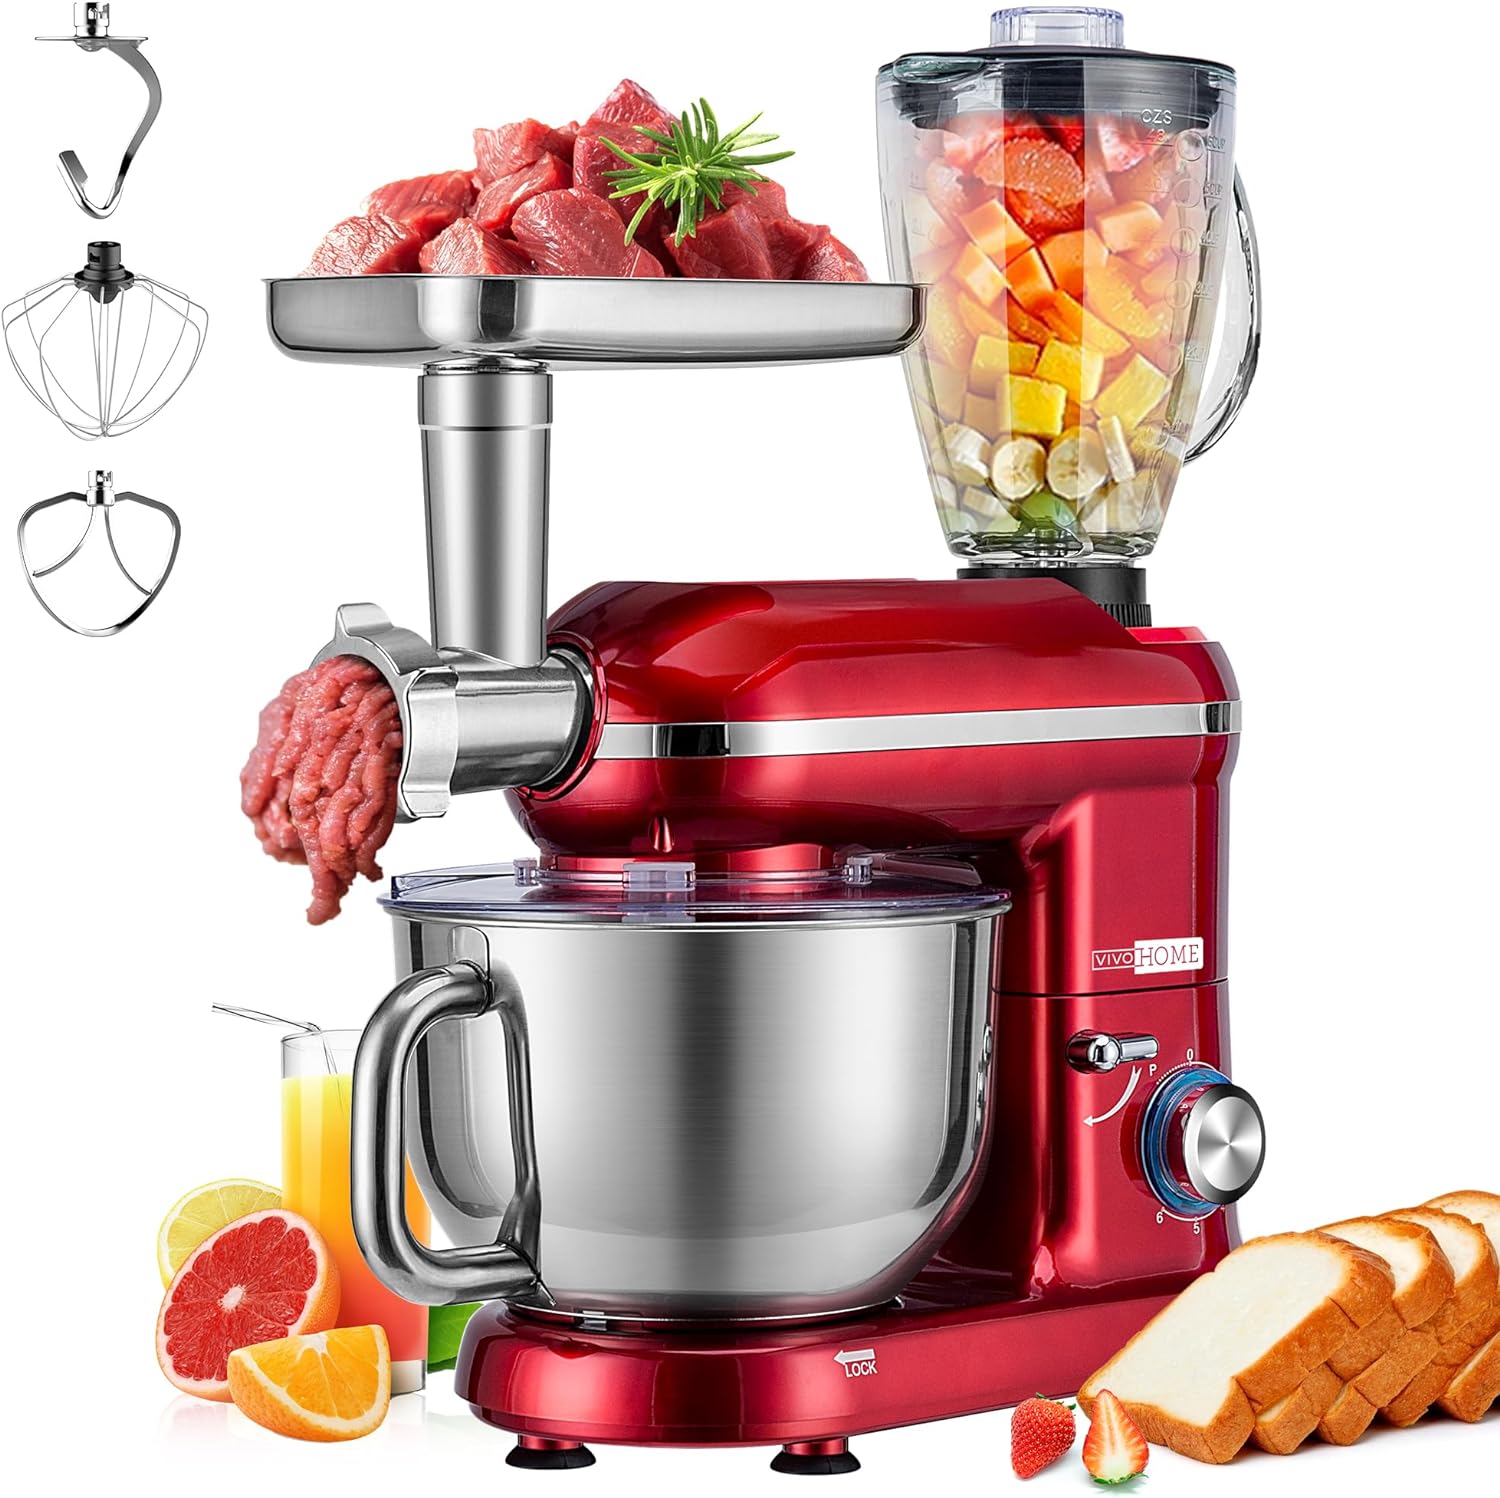 VIVOHOME 3 in 1 Multifunctional Stand Mixer with 6 Quart Stainless Steel Bowl, 650W 6 Speed Tilt-Head Meat Grinder, Juice Blender, Red